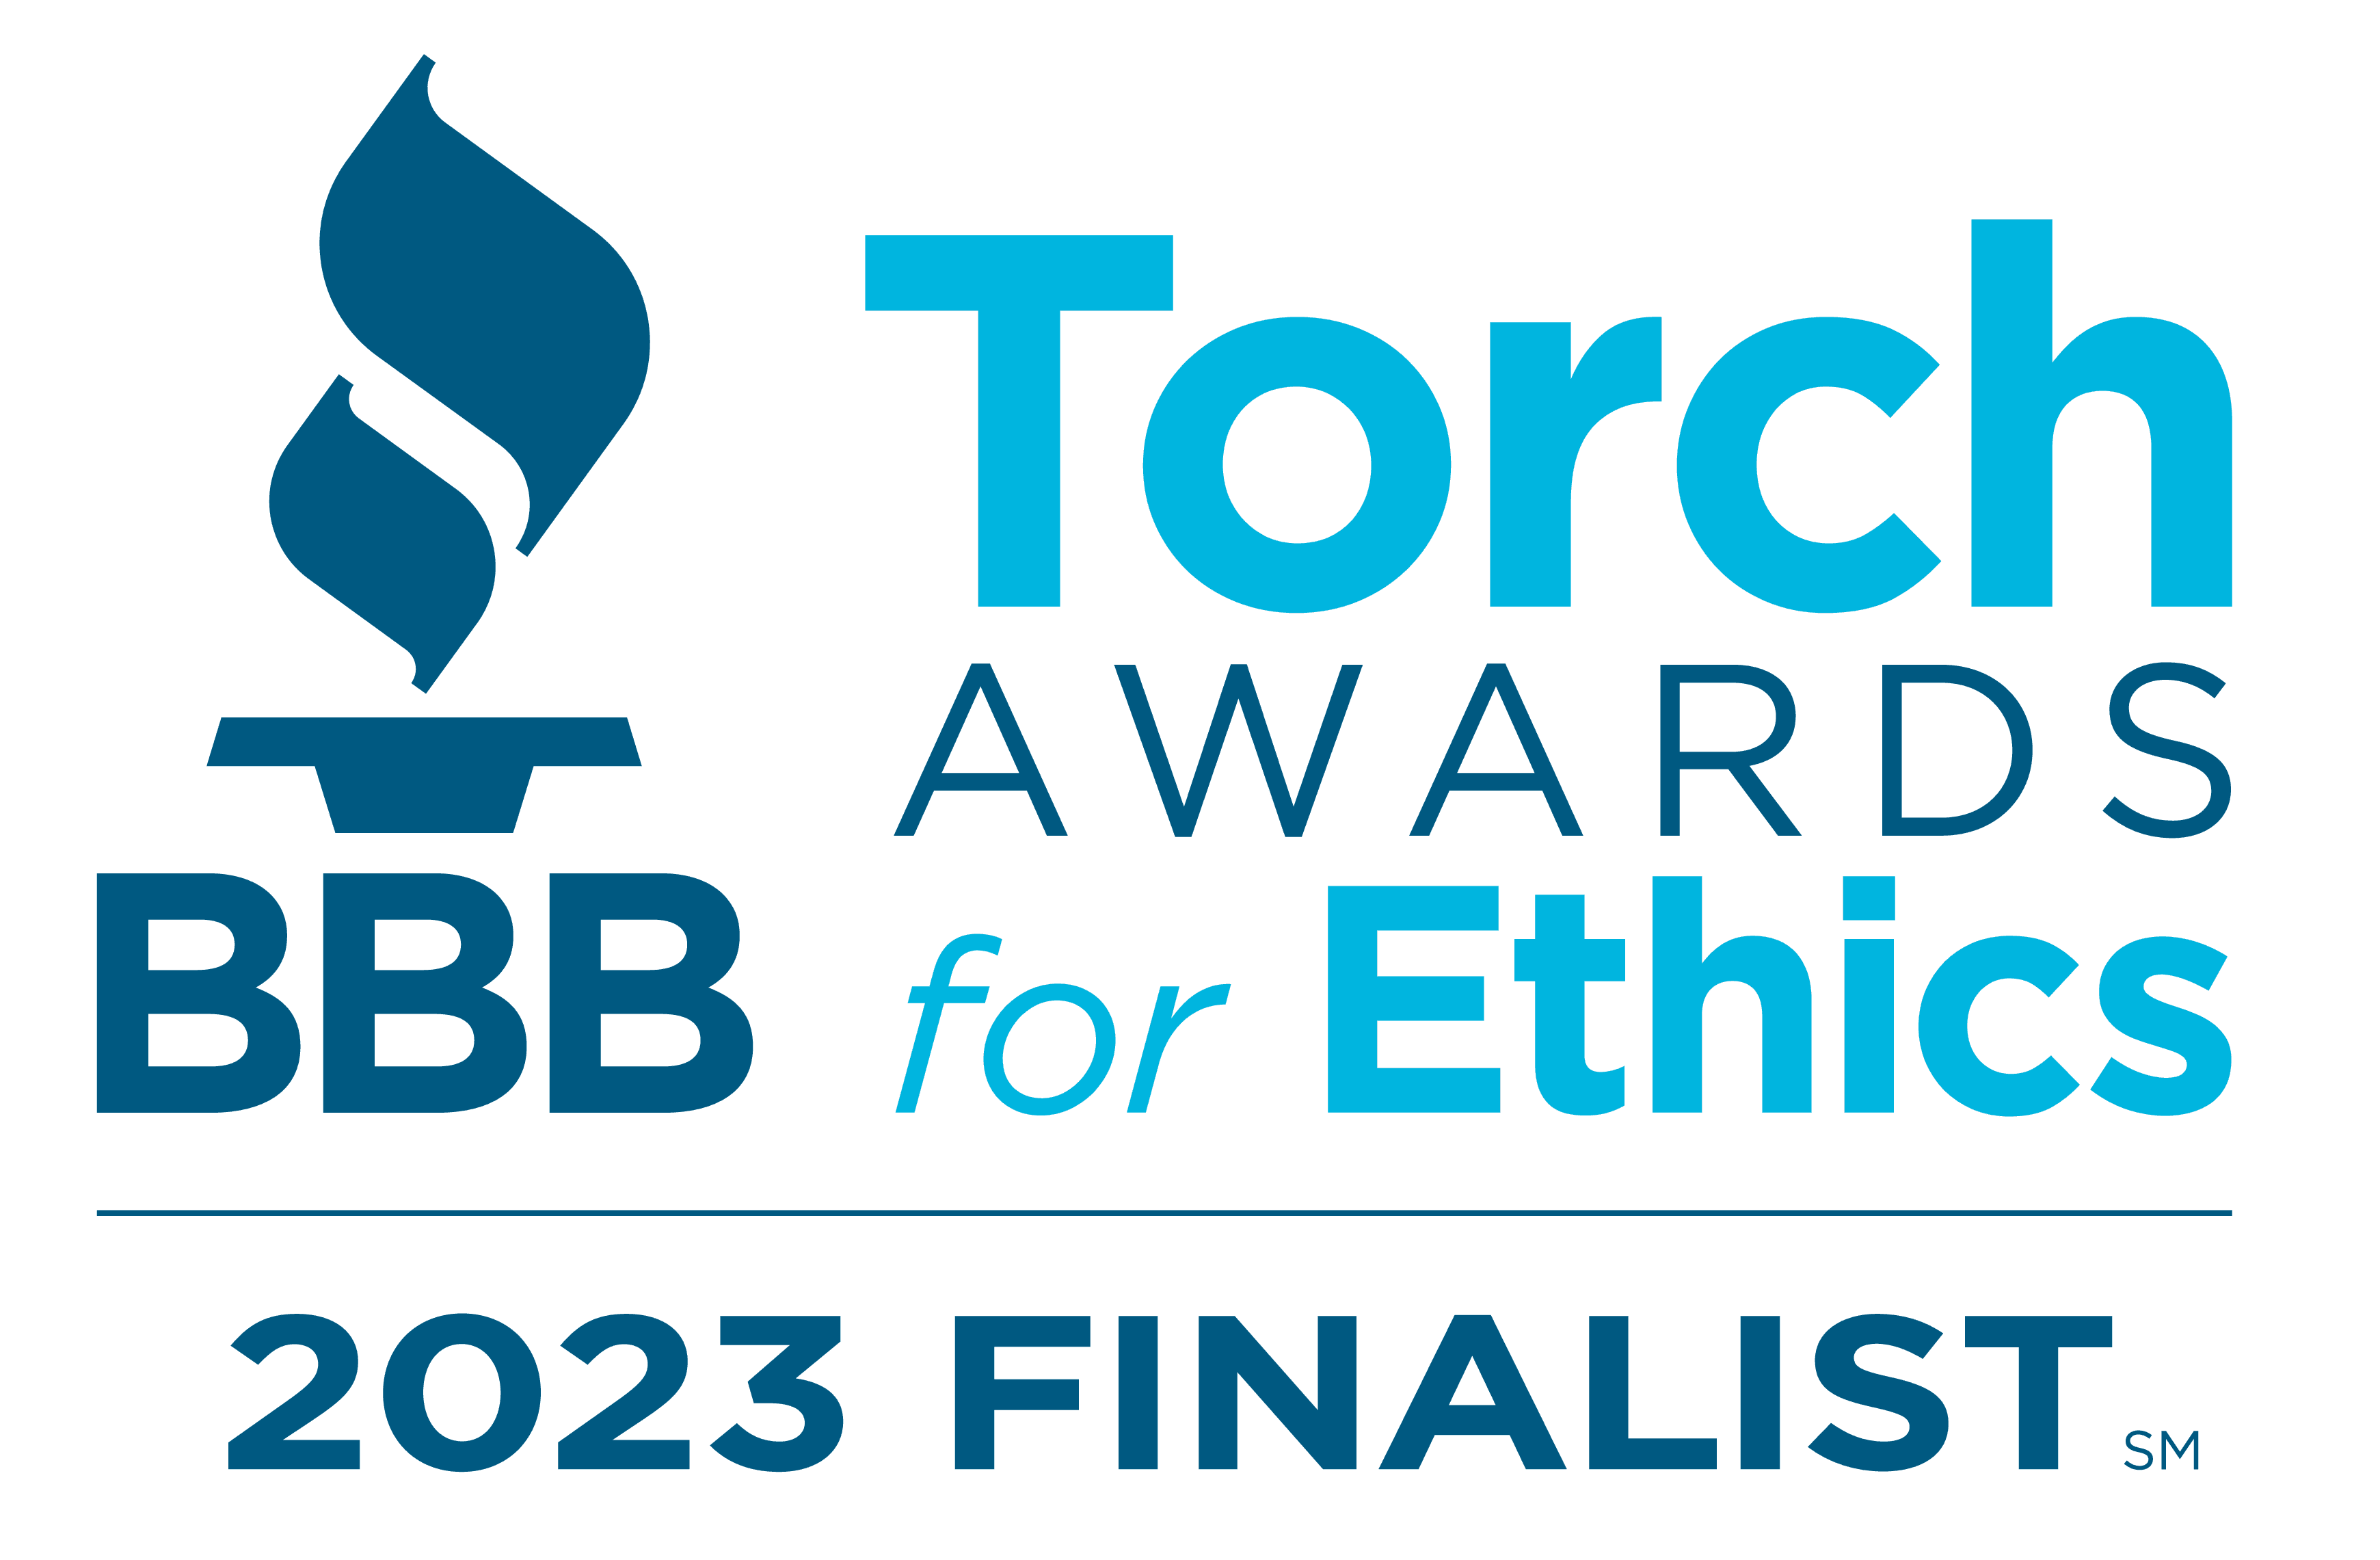 BBB Torch Awards for Ethics 2023 Finalist Logo